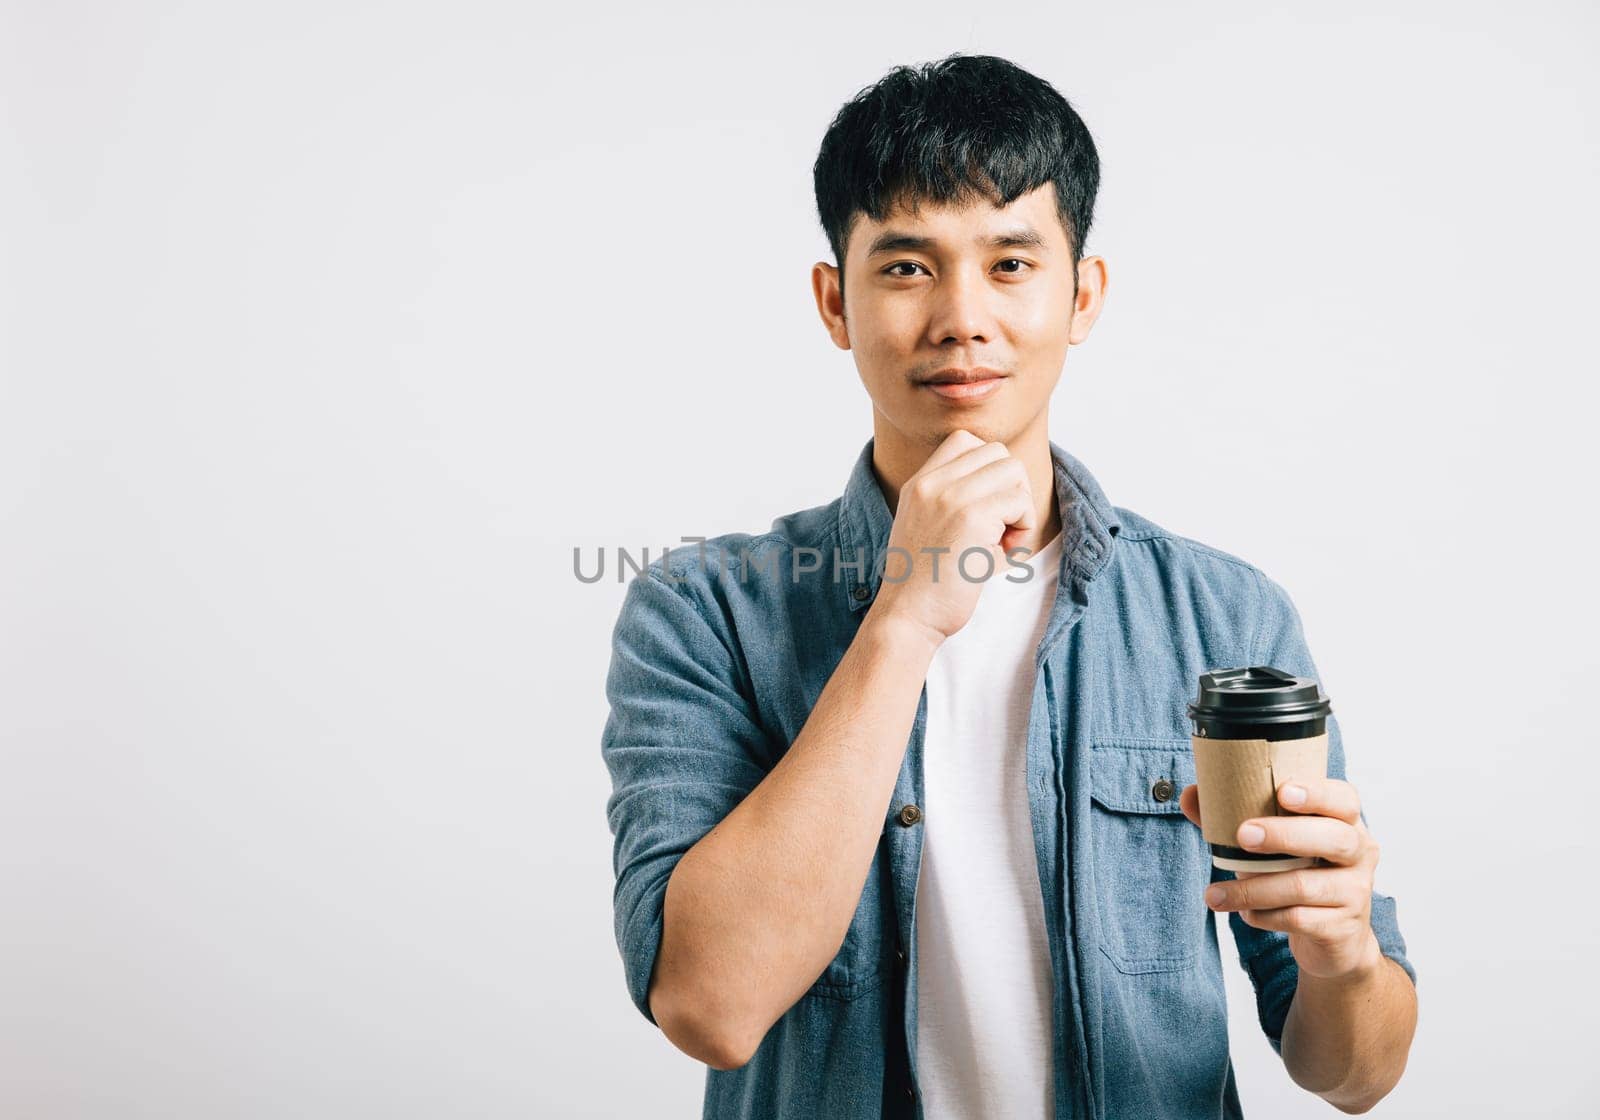 A young Thai man's smiling face while holding a coffee cup. Studio shot isolated on white background with copy space. His happiness is palpable.